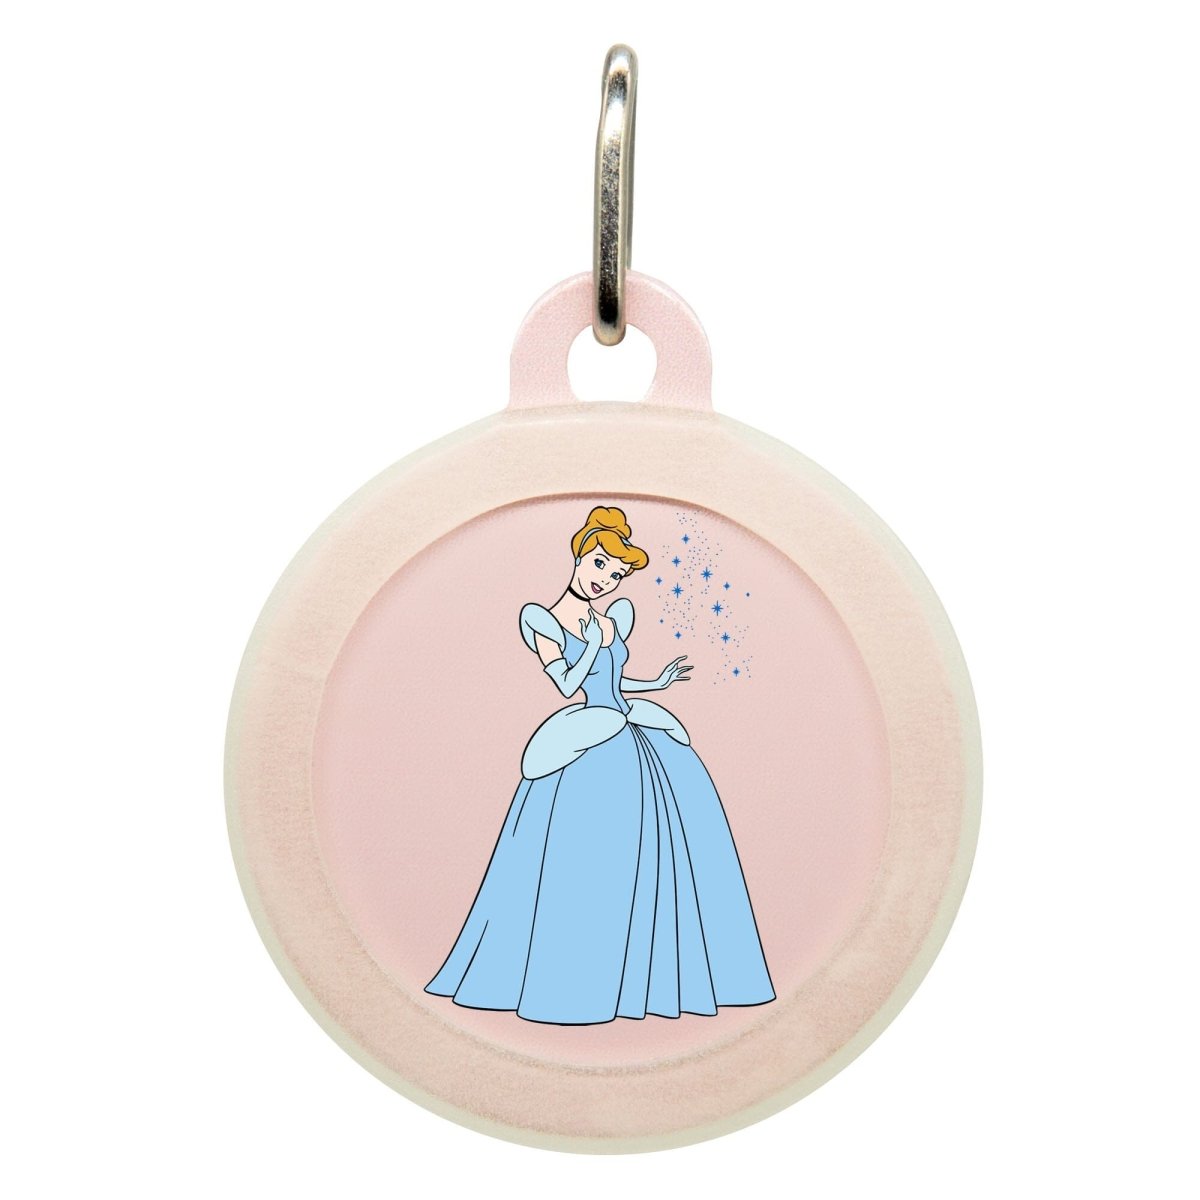 Cinderella Name Tag - Oh My Paw'd